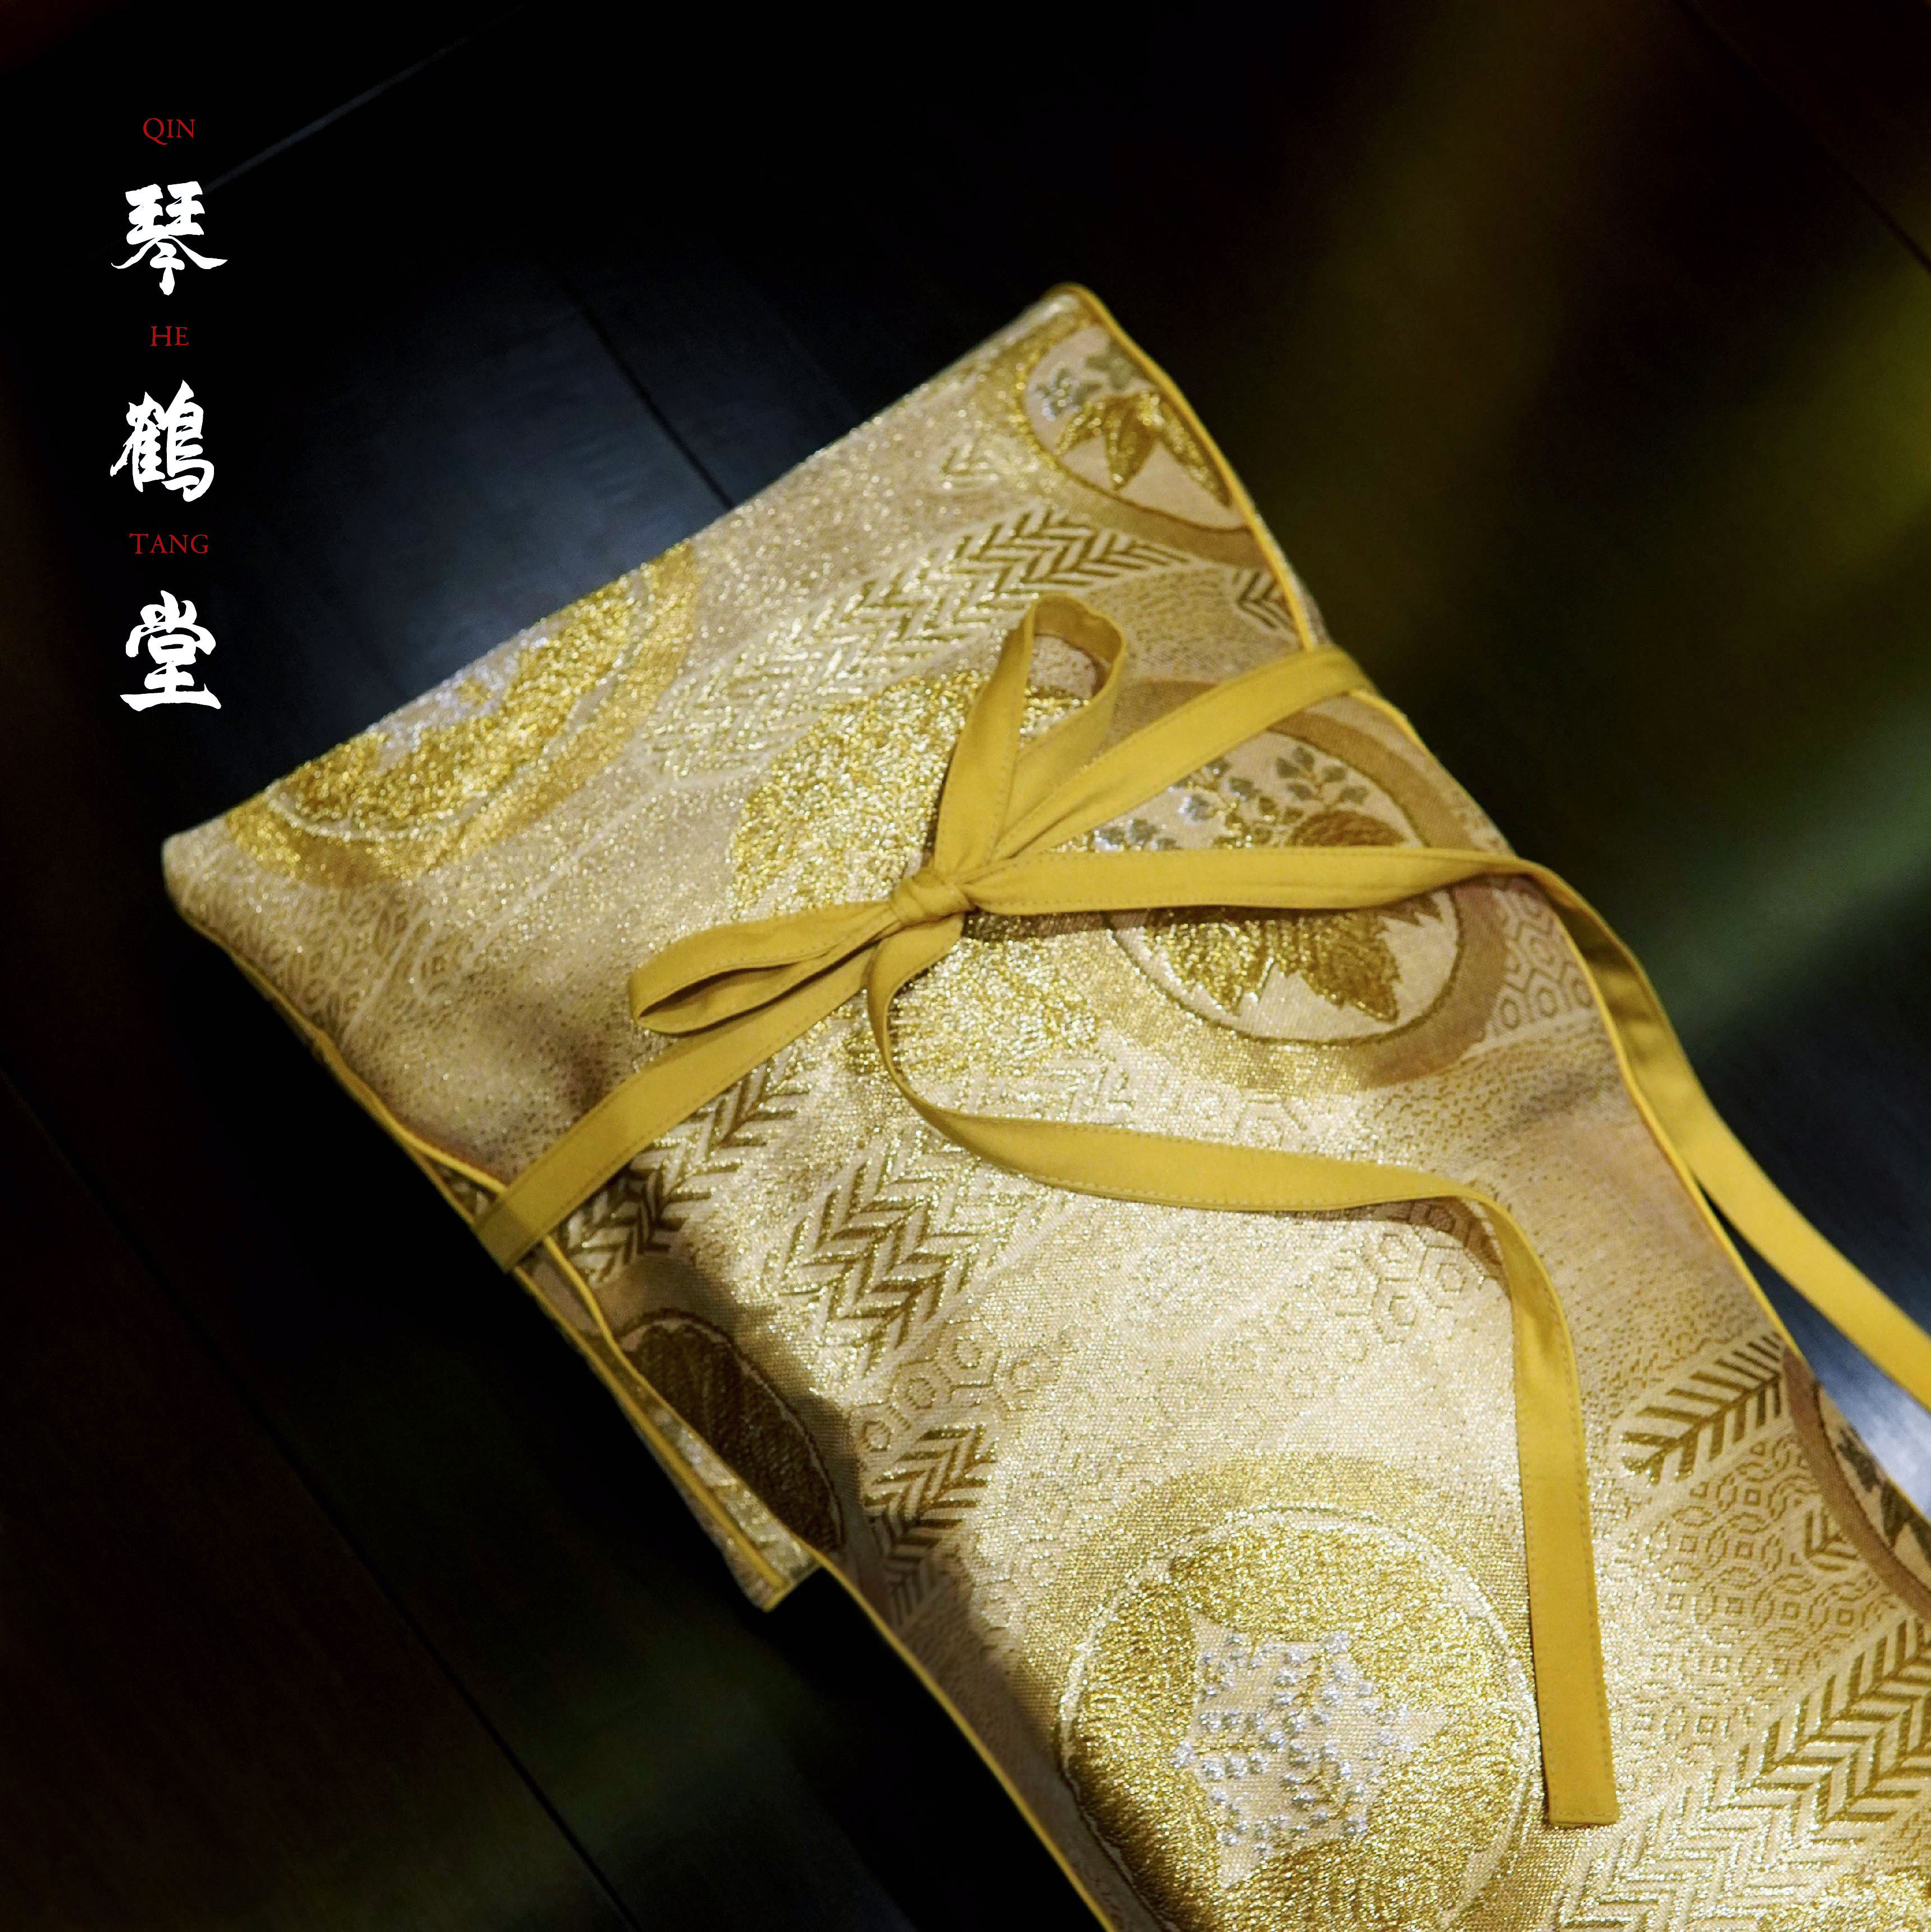 Golden Melody" Vintage Silk Brocade Guqin Bag - Exquisite Handcrafted Chinese Traditional Instrument Case